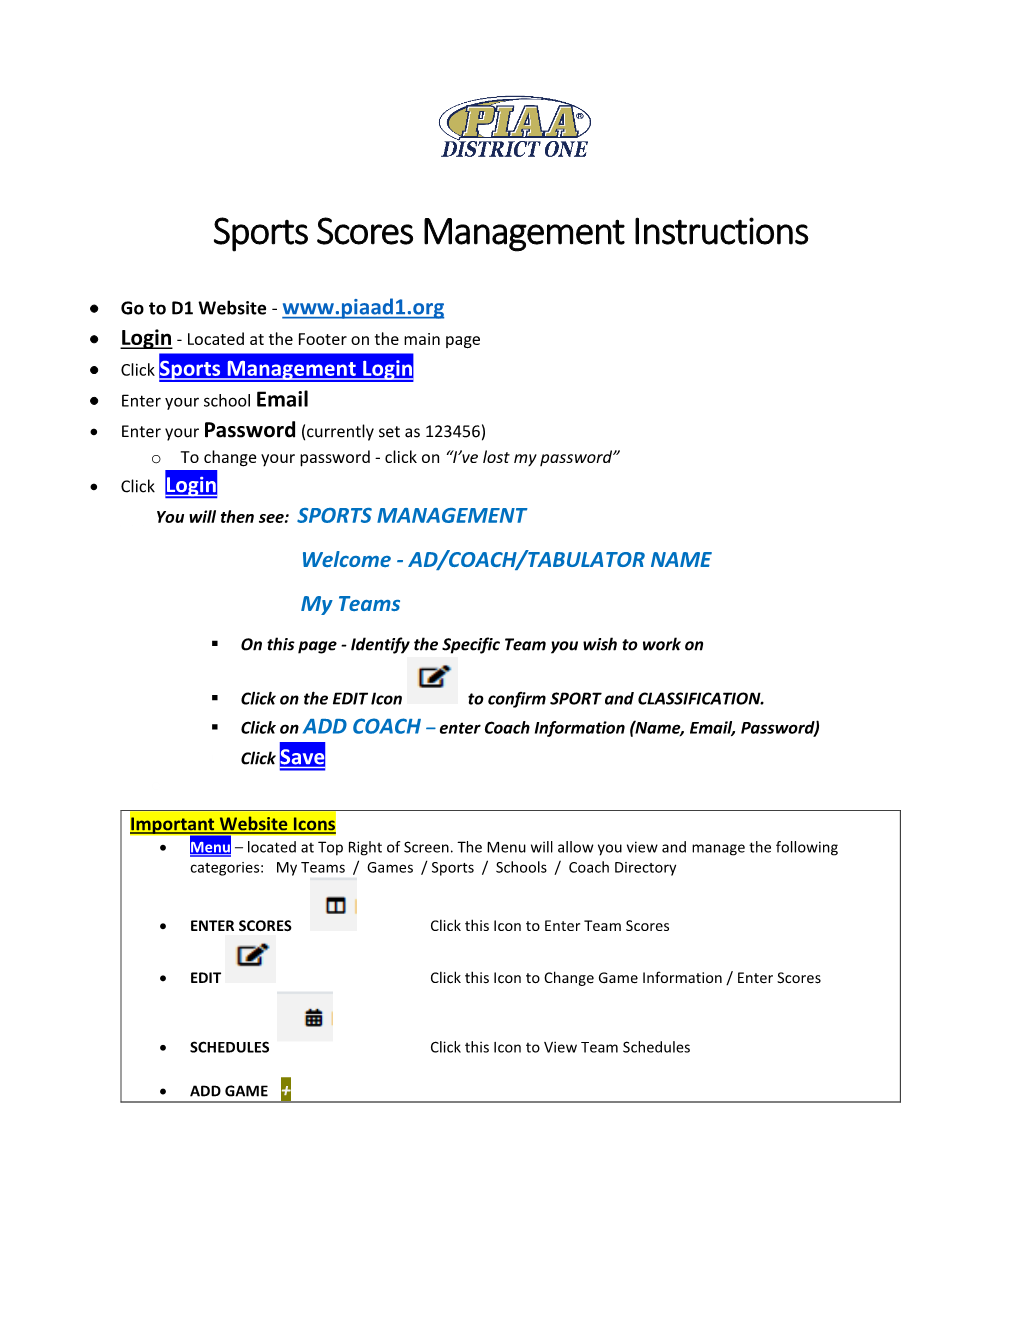 Schedule/Score Reporting Instructions